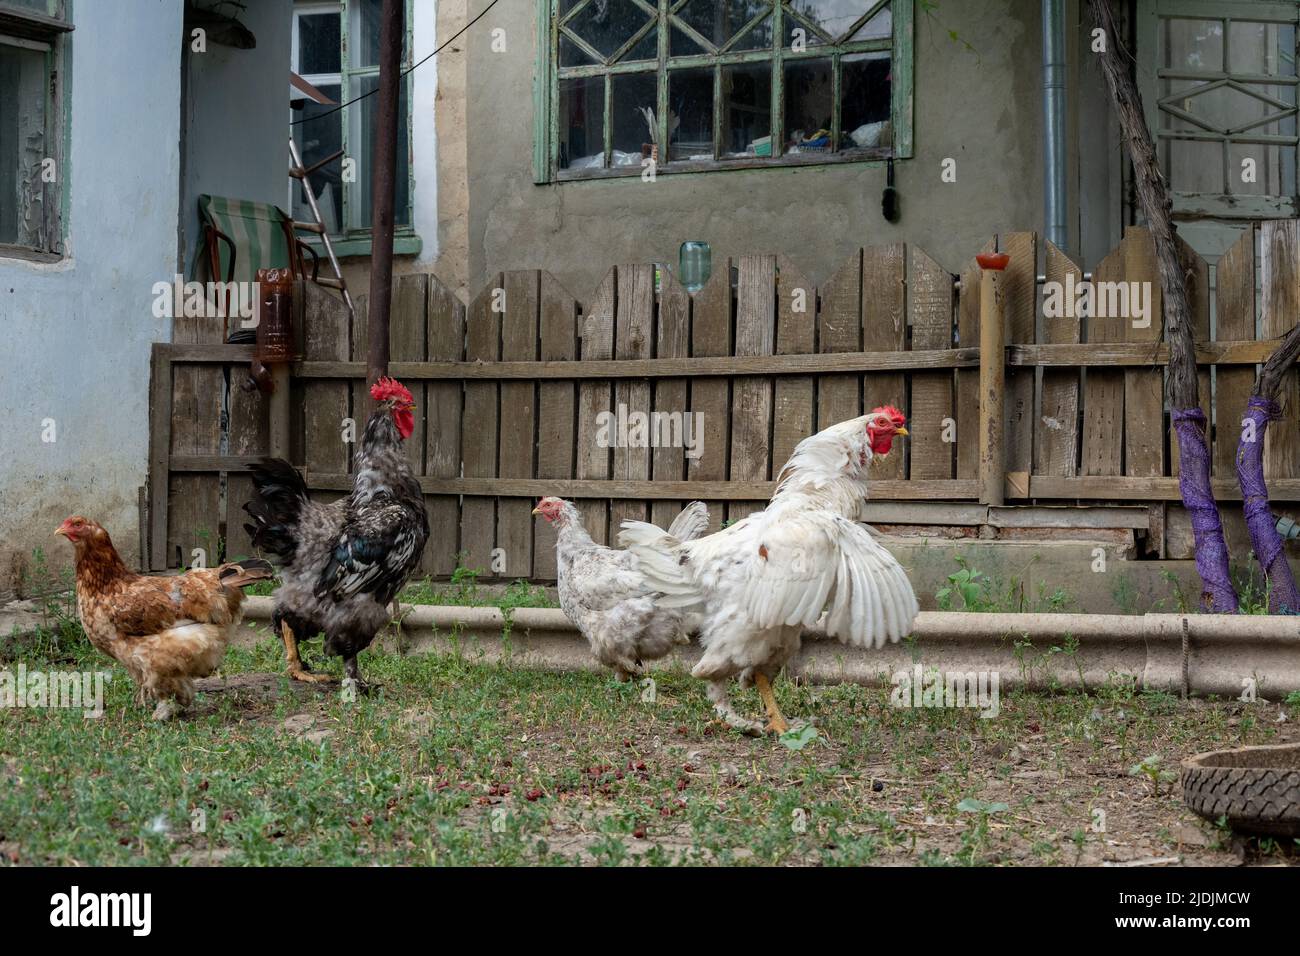 Roosters flirt with hens. The young rooster spread its wings. Reproduction of chickens. Home mini farm concept Stock Photo